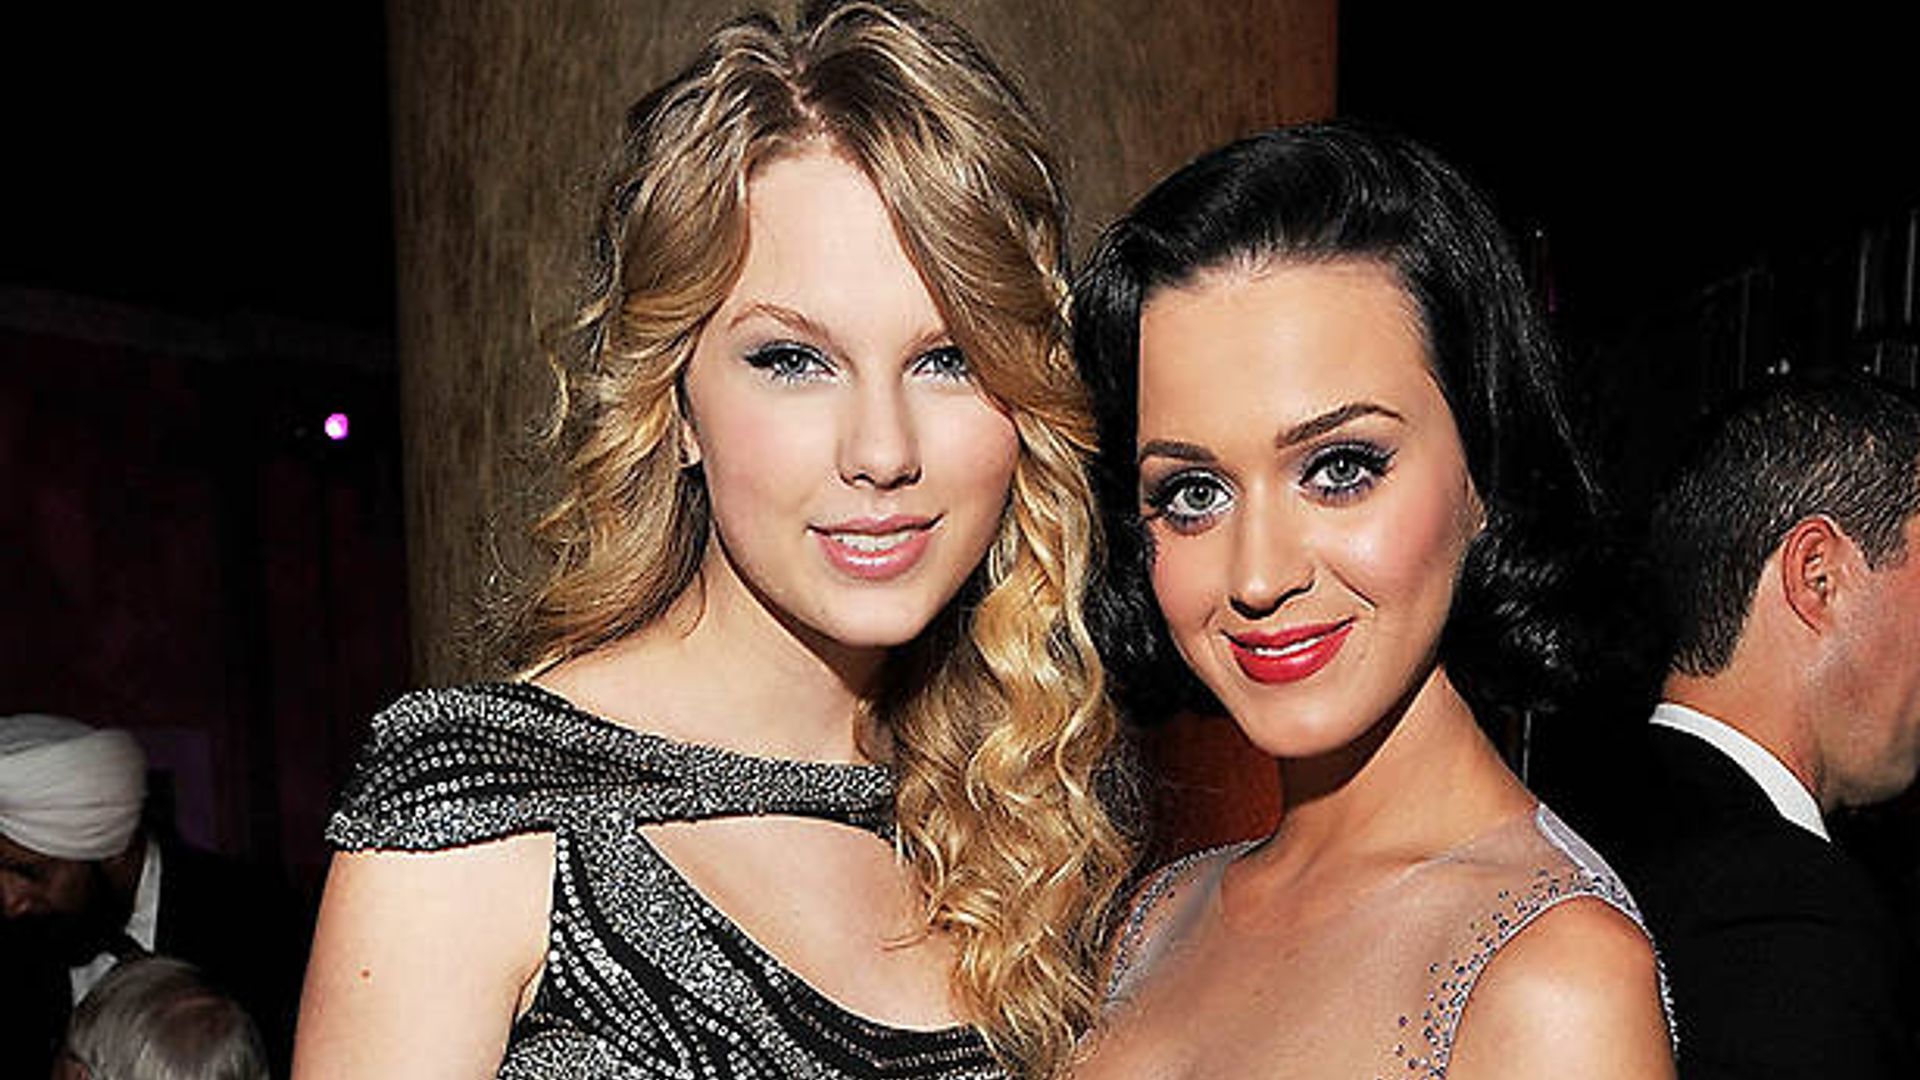 katy-perry-taylor-swift